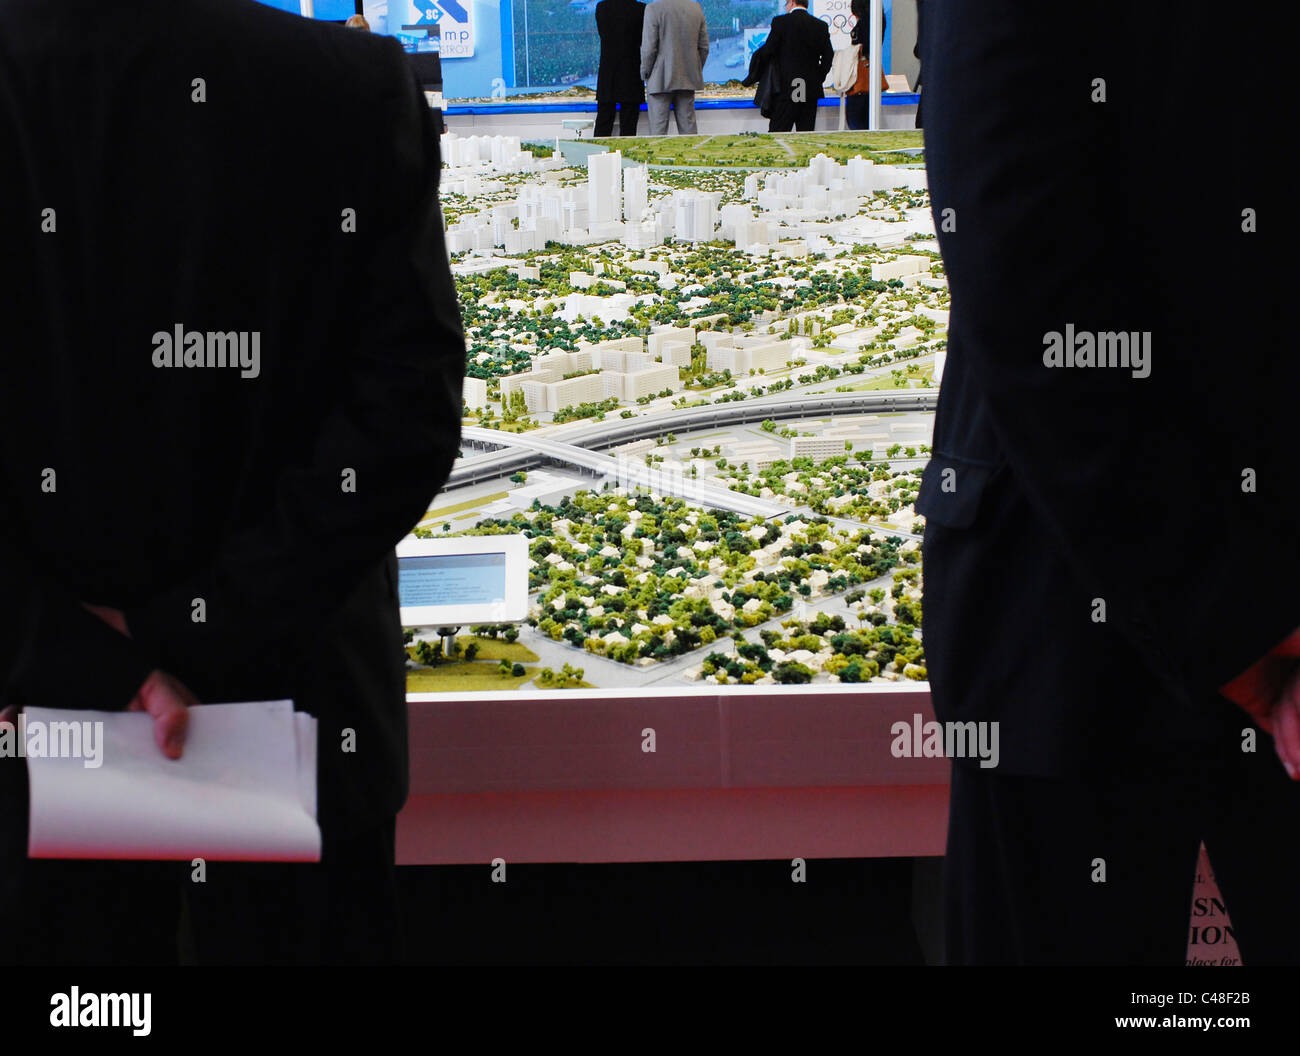 FRANCE CANNES. 10th March 2009. MIPIM the world's biggest property fair. Investors look at model of Krasnoder region Russia Stock Photo